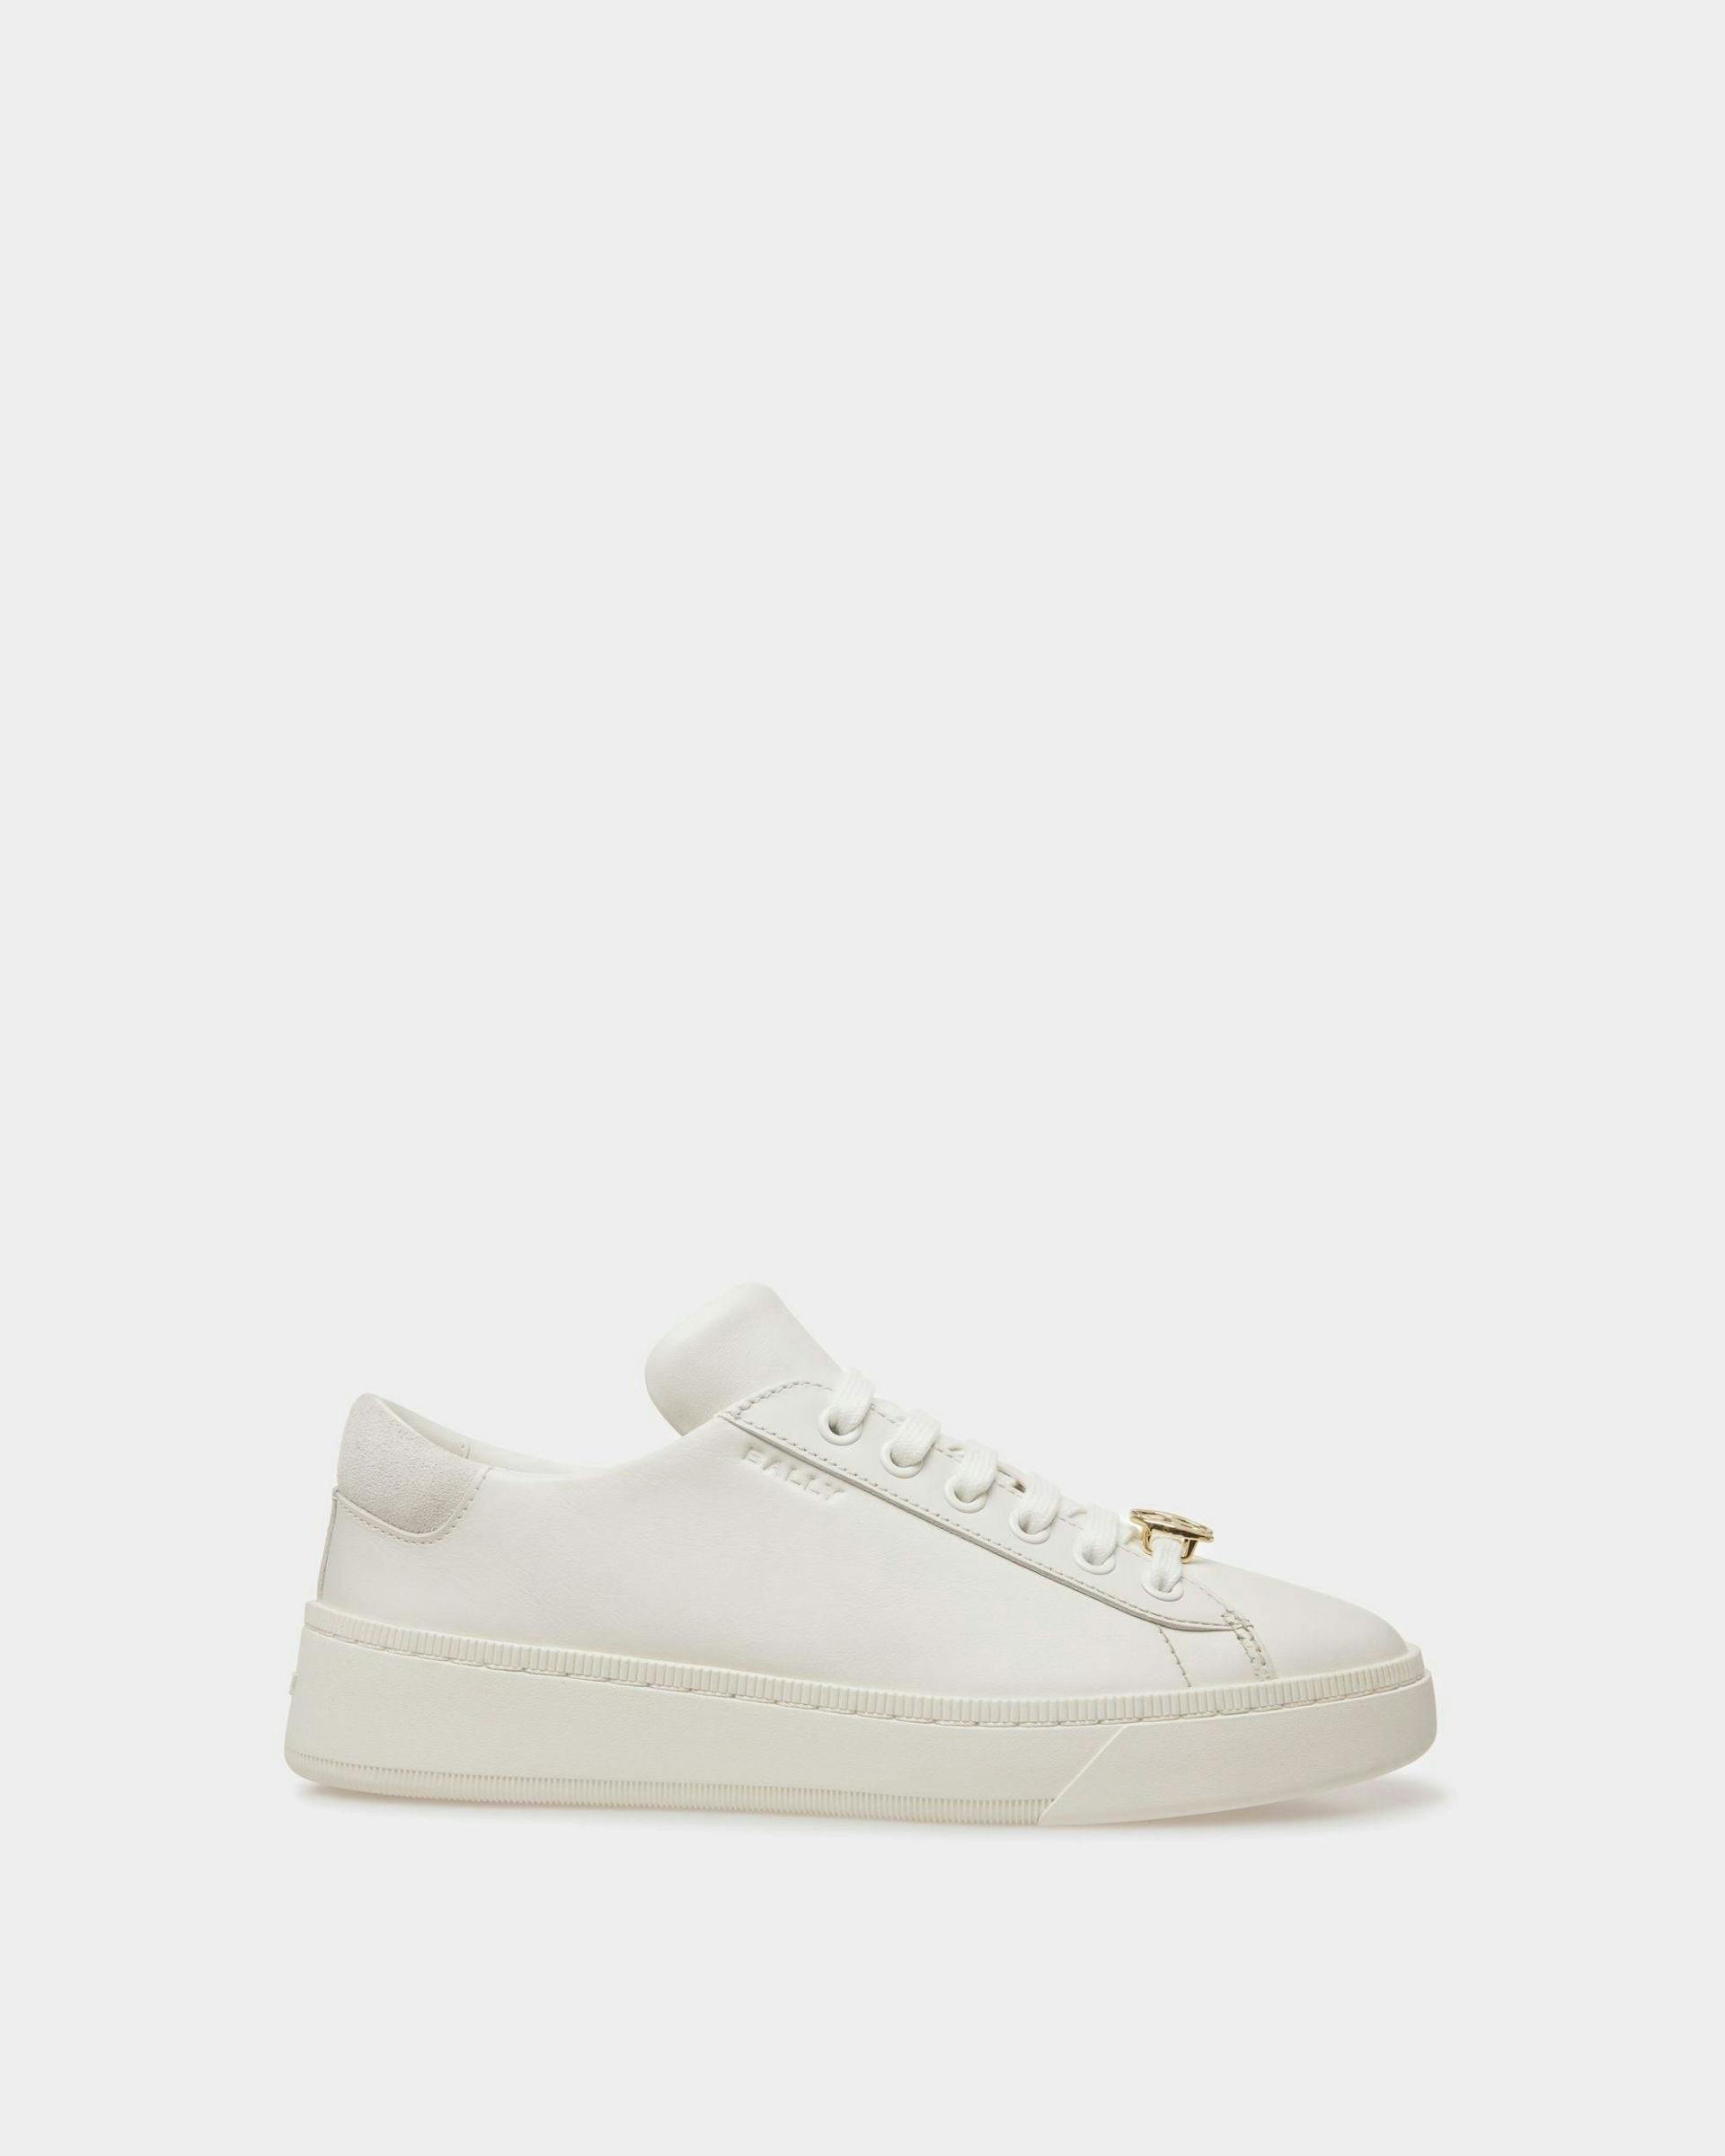 Raise Sneakers In White Leather - Women's - Bally - 01